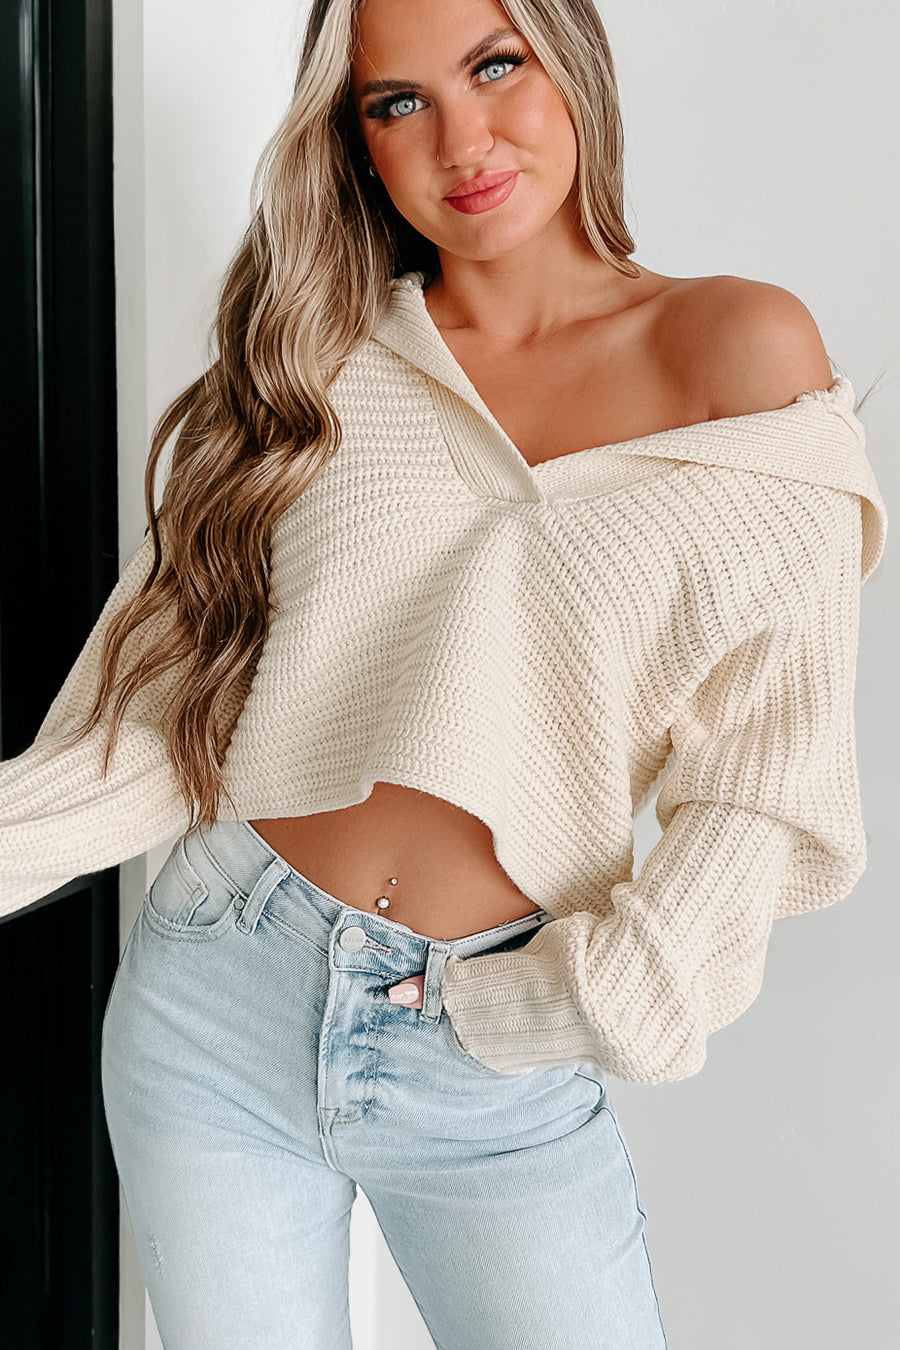 Can't Talk Right Now Collared Crop Sweater (Cream) - NanaMacs